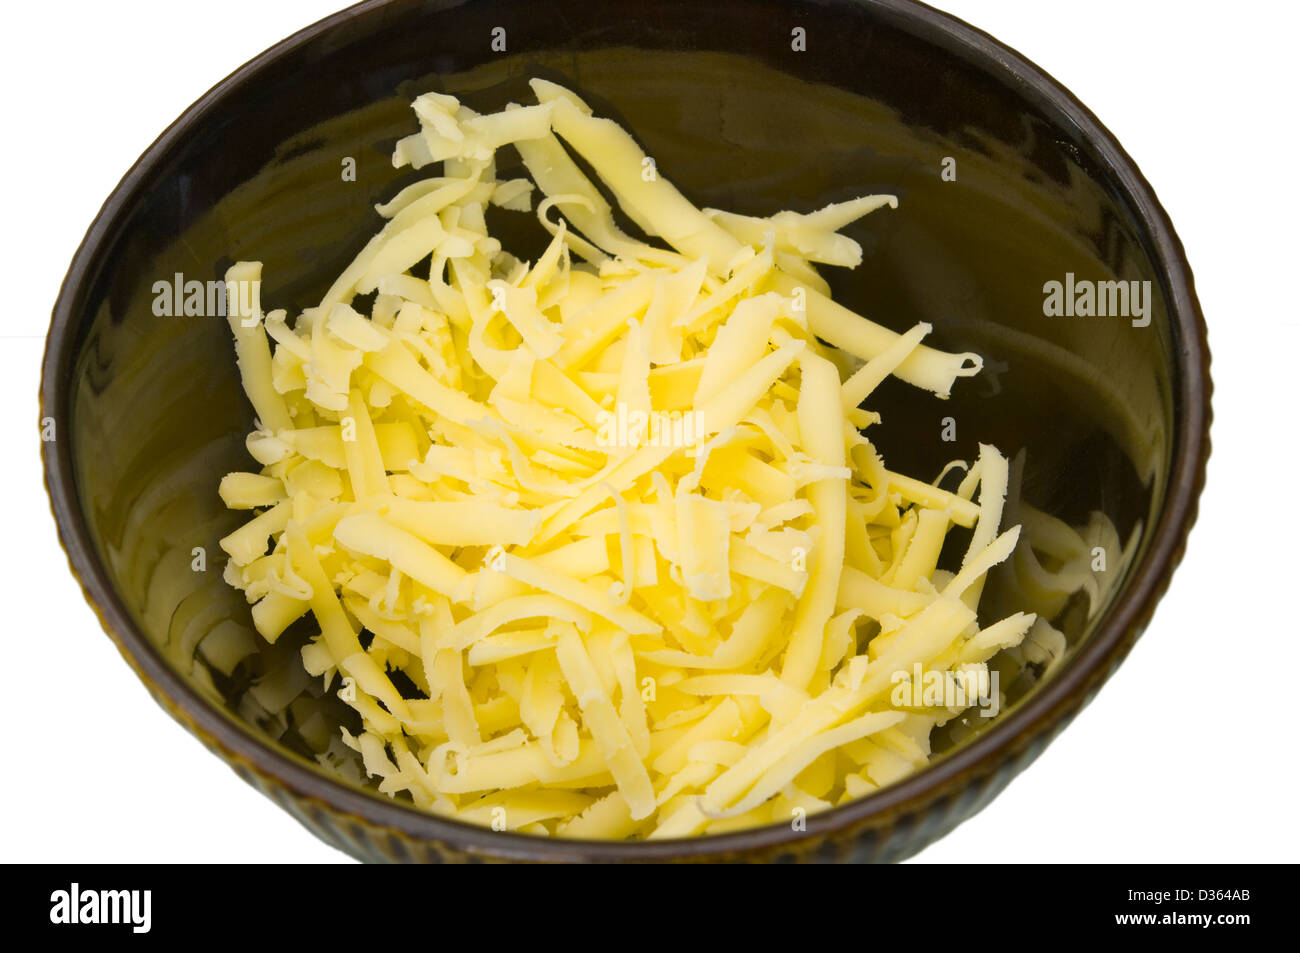 Grated Cheese In A Bowl Stock Photo